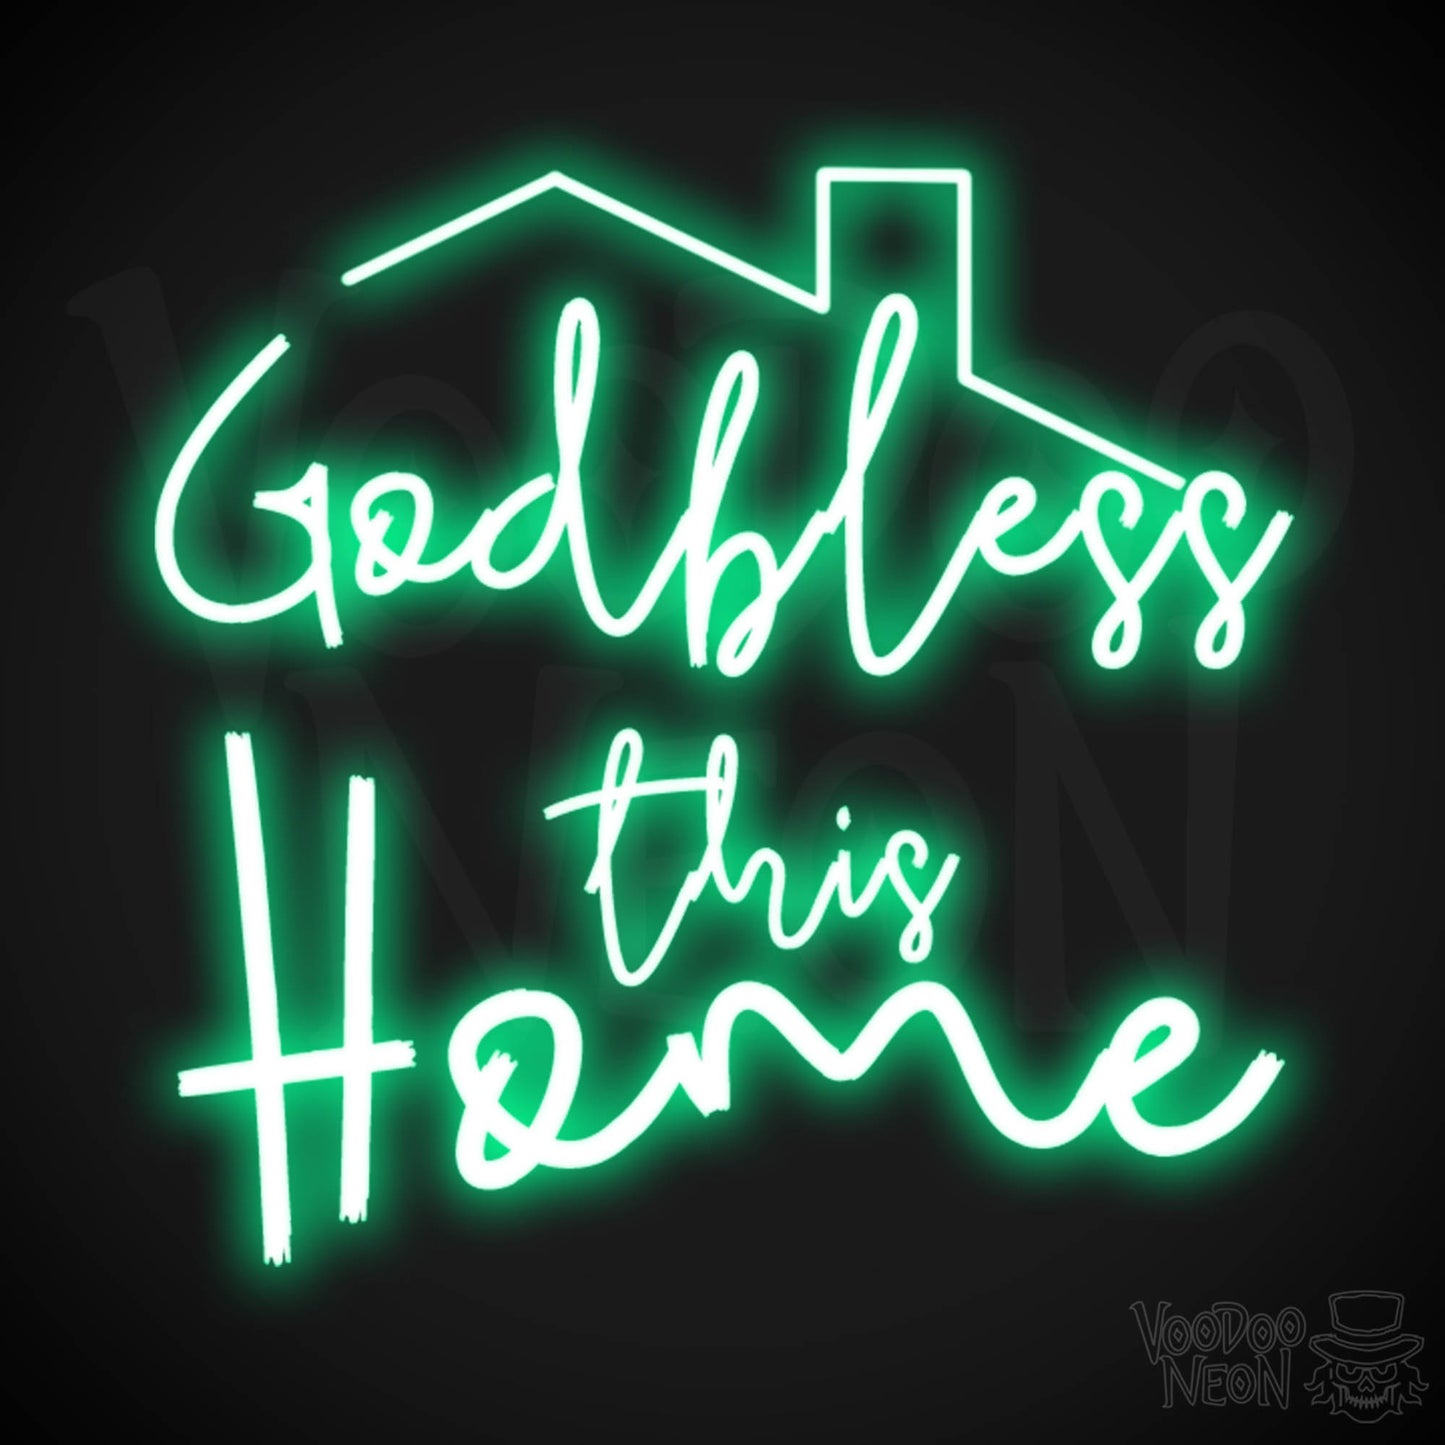 God Bless This House Neon Sign - Neon God Bless This House Sign - Wall Art - Light Up Sign - Color Green